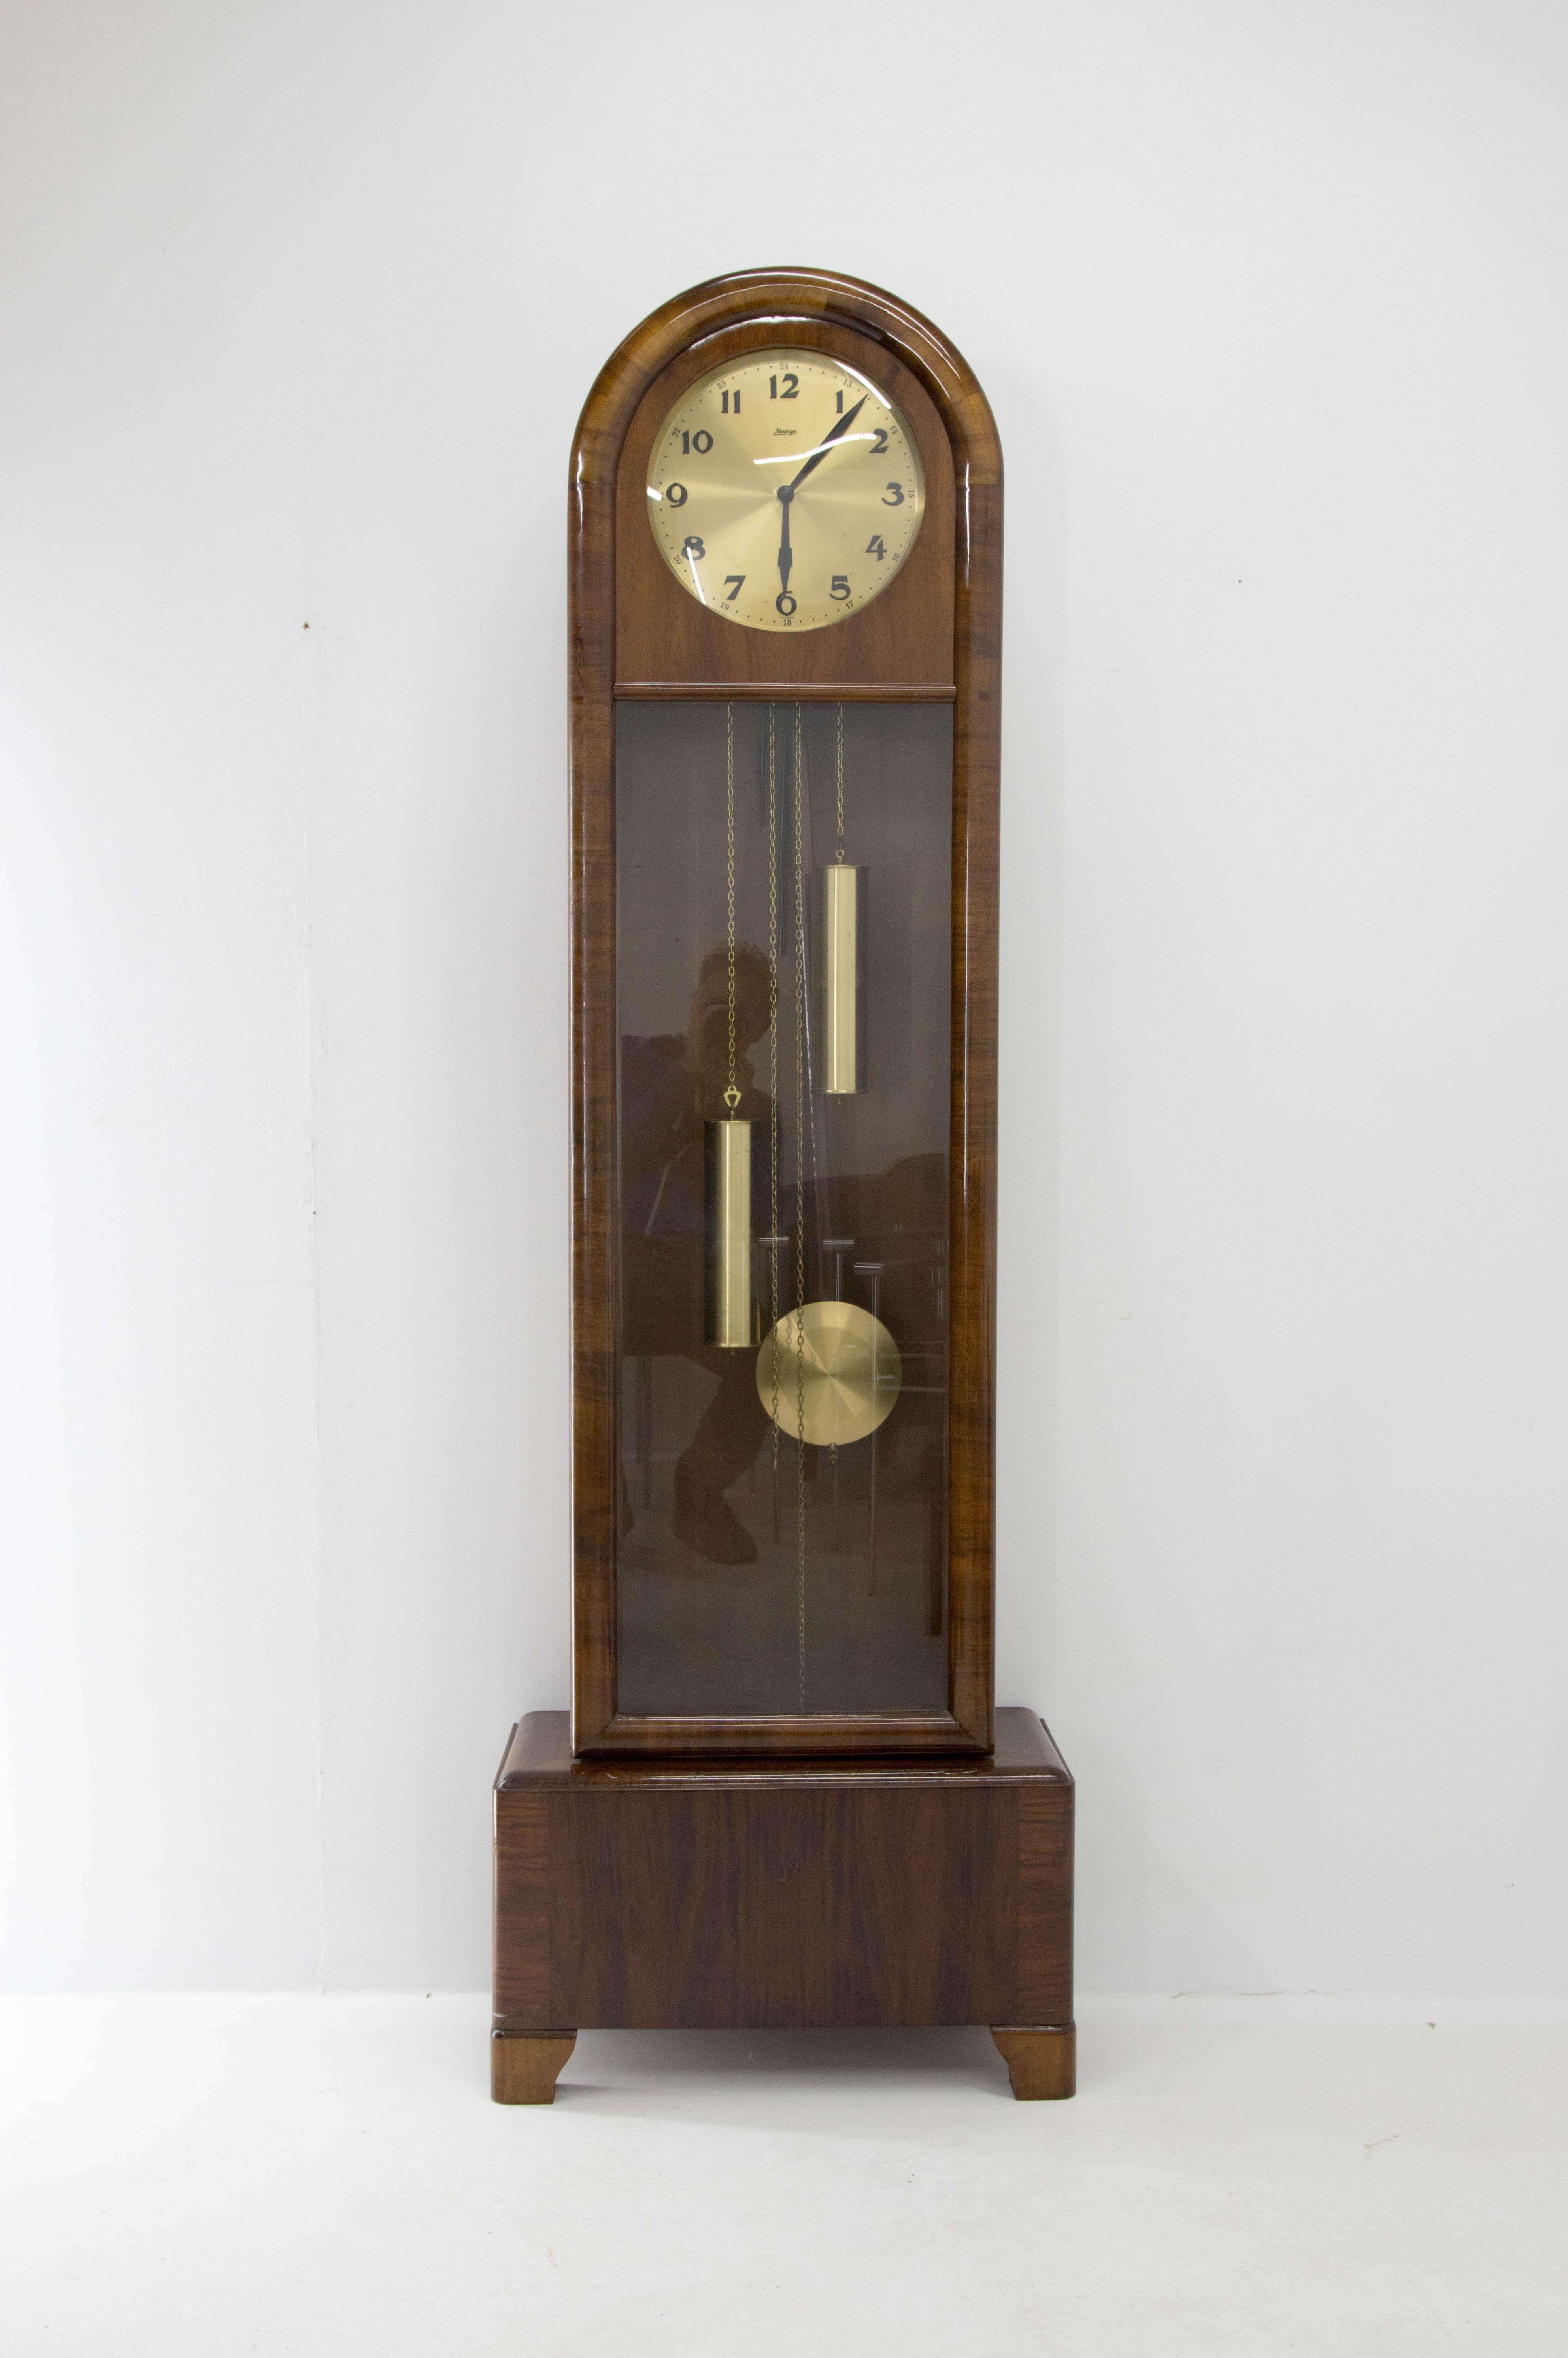 Floor clock with case in walnut finish with brass column caps.
Made in Germany in 1930s or 1940s.
Perfect original condition.
Beautiful sound.